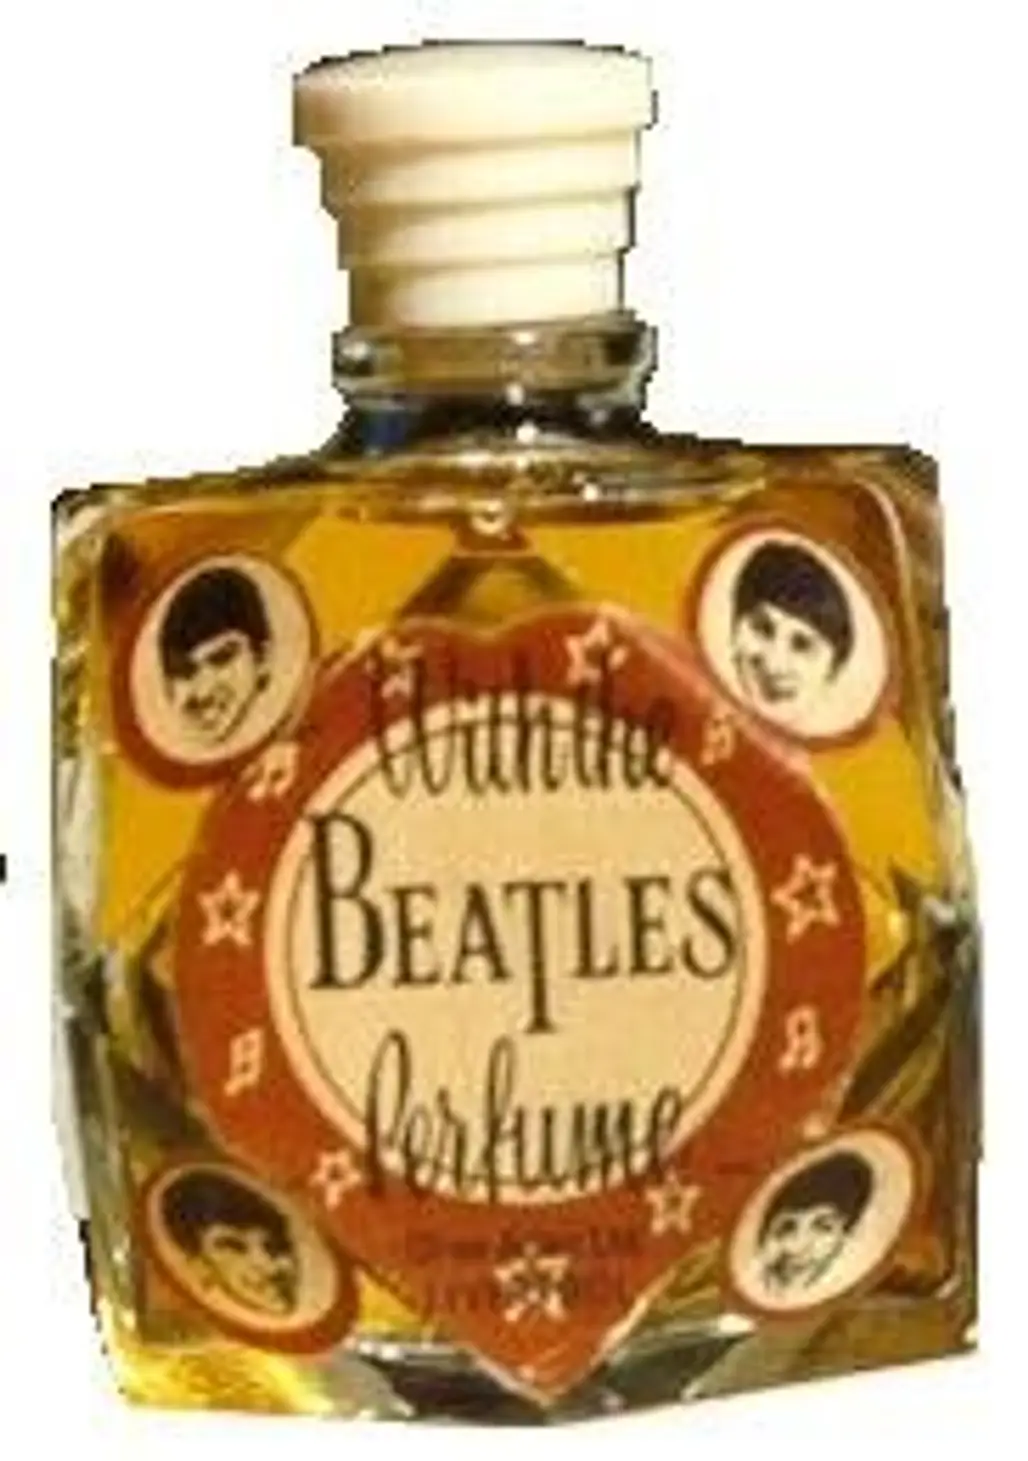 With the Beatles by Olive Adair Ltd